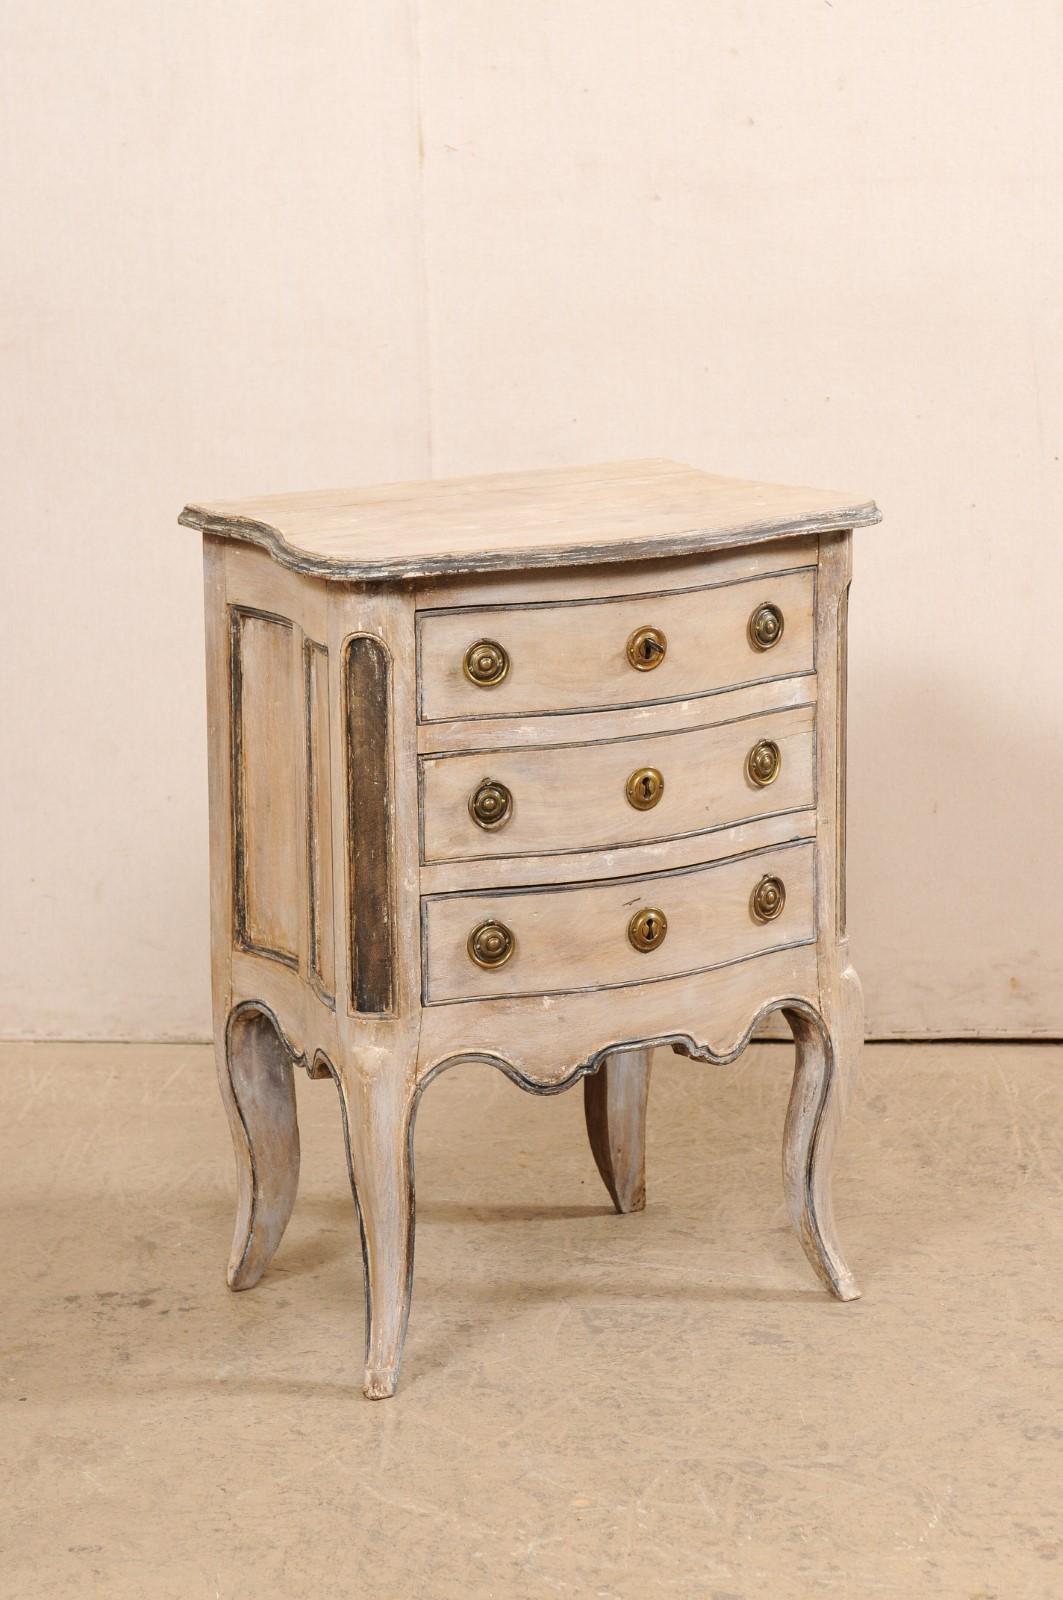 A French small-sized serpentine chest from the 18th century. This antique commode from France features a serpentine front and curvy sides, three dove-tailed drawers housed between round front side posts adorn with elongated recessed panels, and a